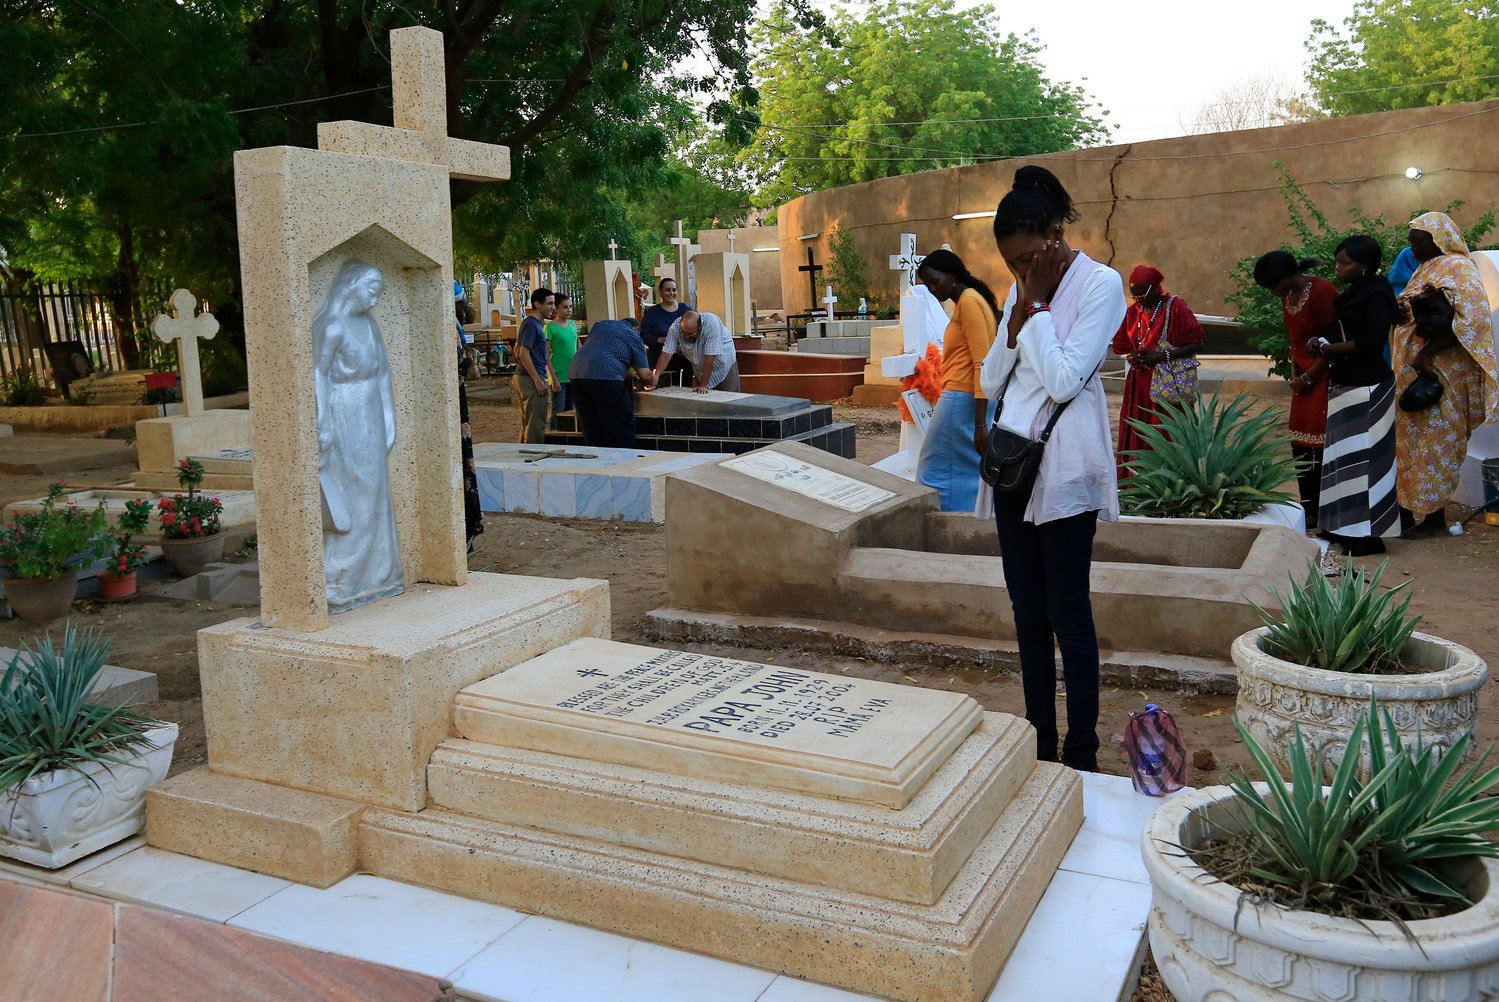 A family prays next to a relative’s grave in a cemetery during All Souls’ Day in Khartoum, Sudan, in this Nov. 11, 2014, file photo. With the continuing pandemic, the Vatican has again extended throughout all of November the opportunity to receive a plenary indulgence for visiting a cemetery to pray for the dead.